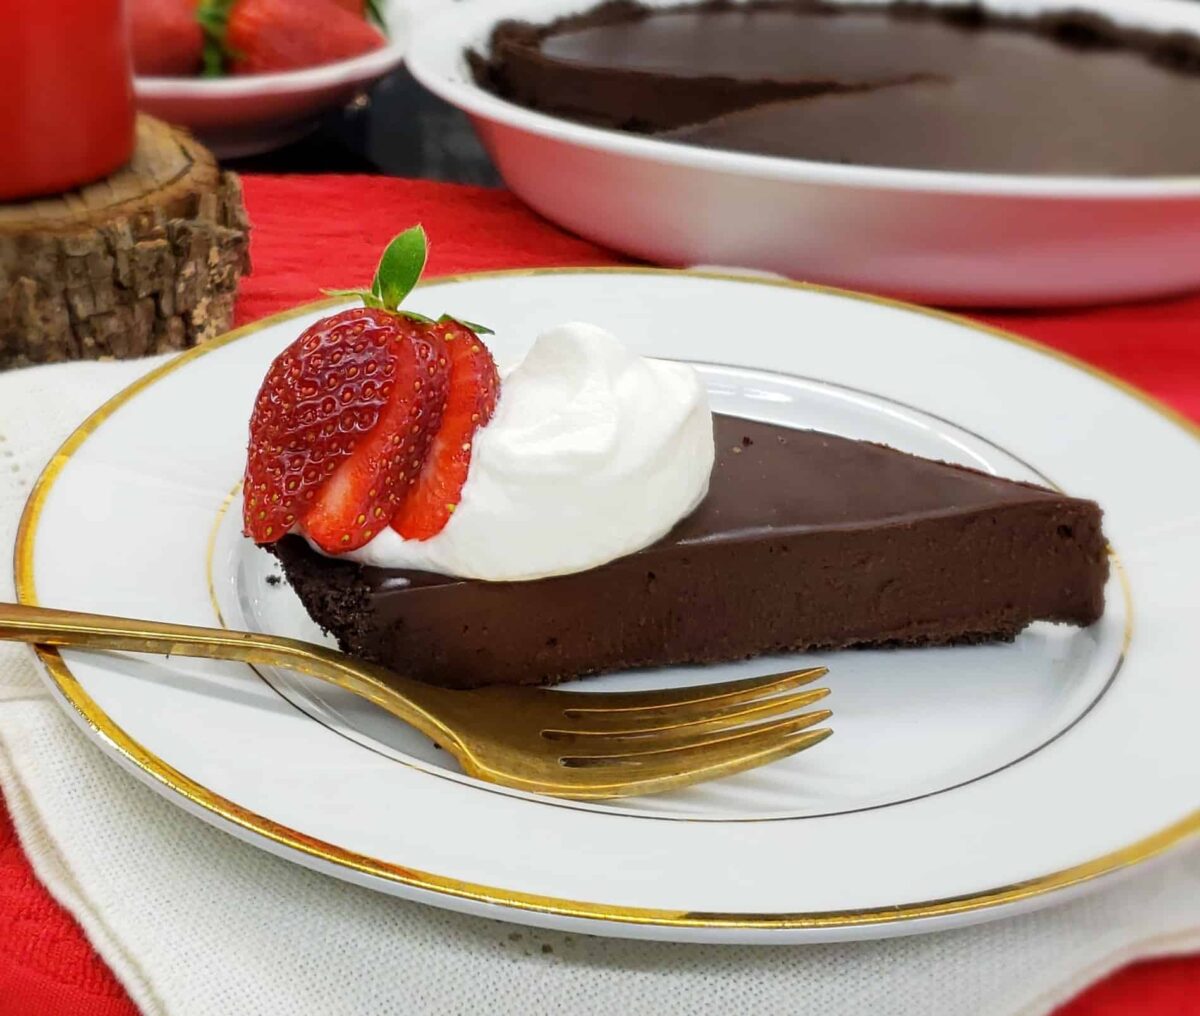 Slice of chocolate tart with whipped cream and strawberry slices on a gold rimmed plate and gold fork